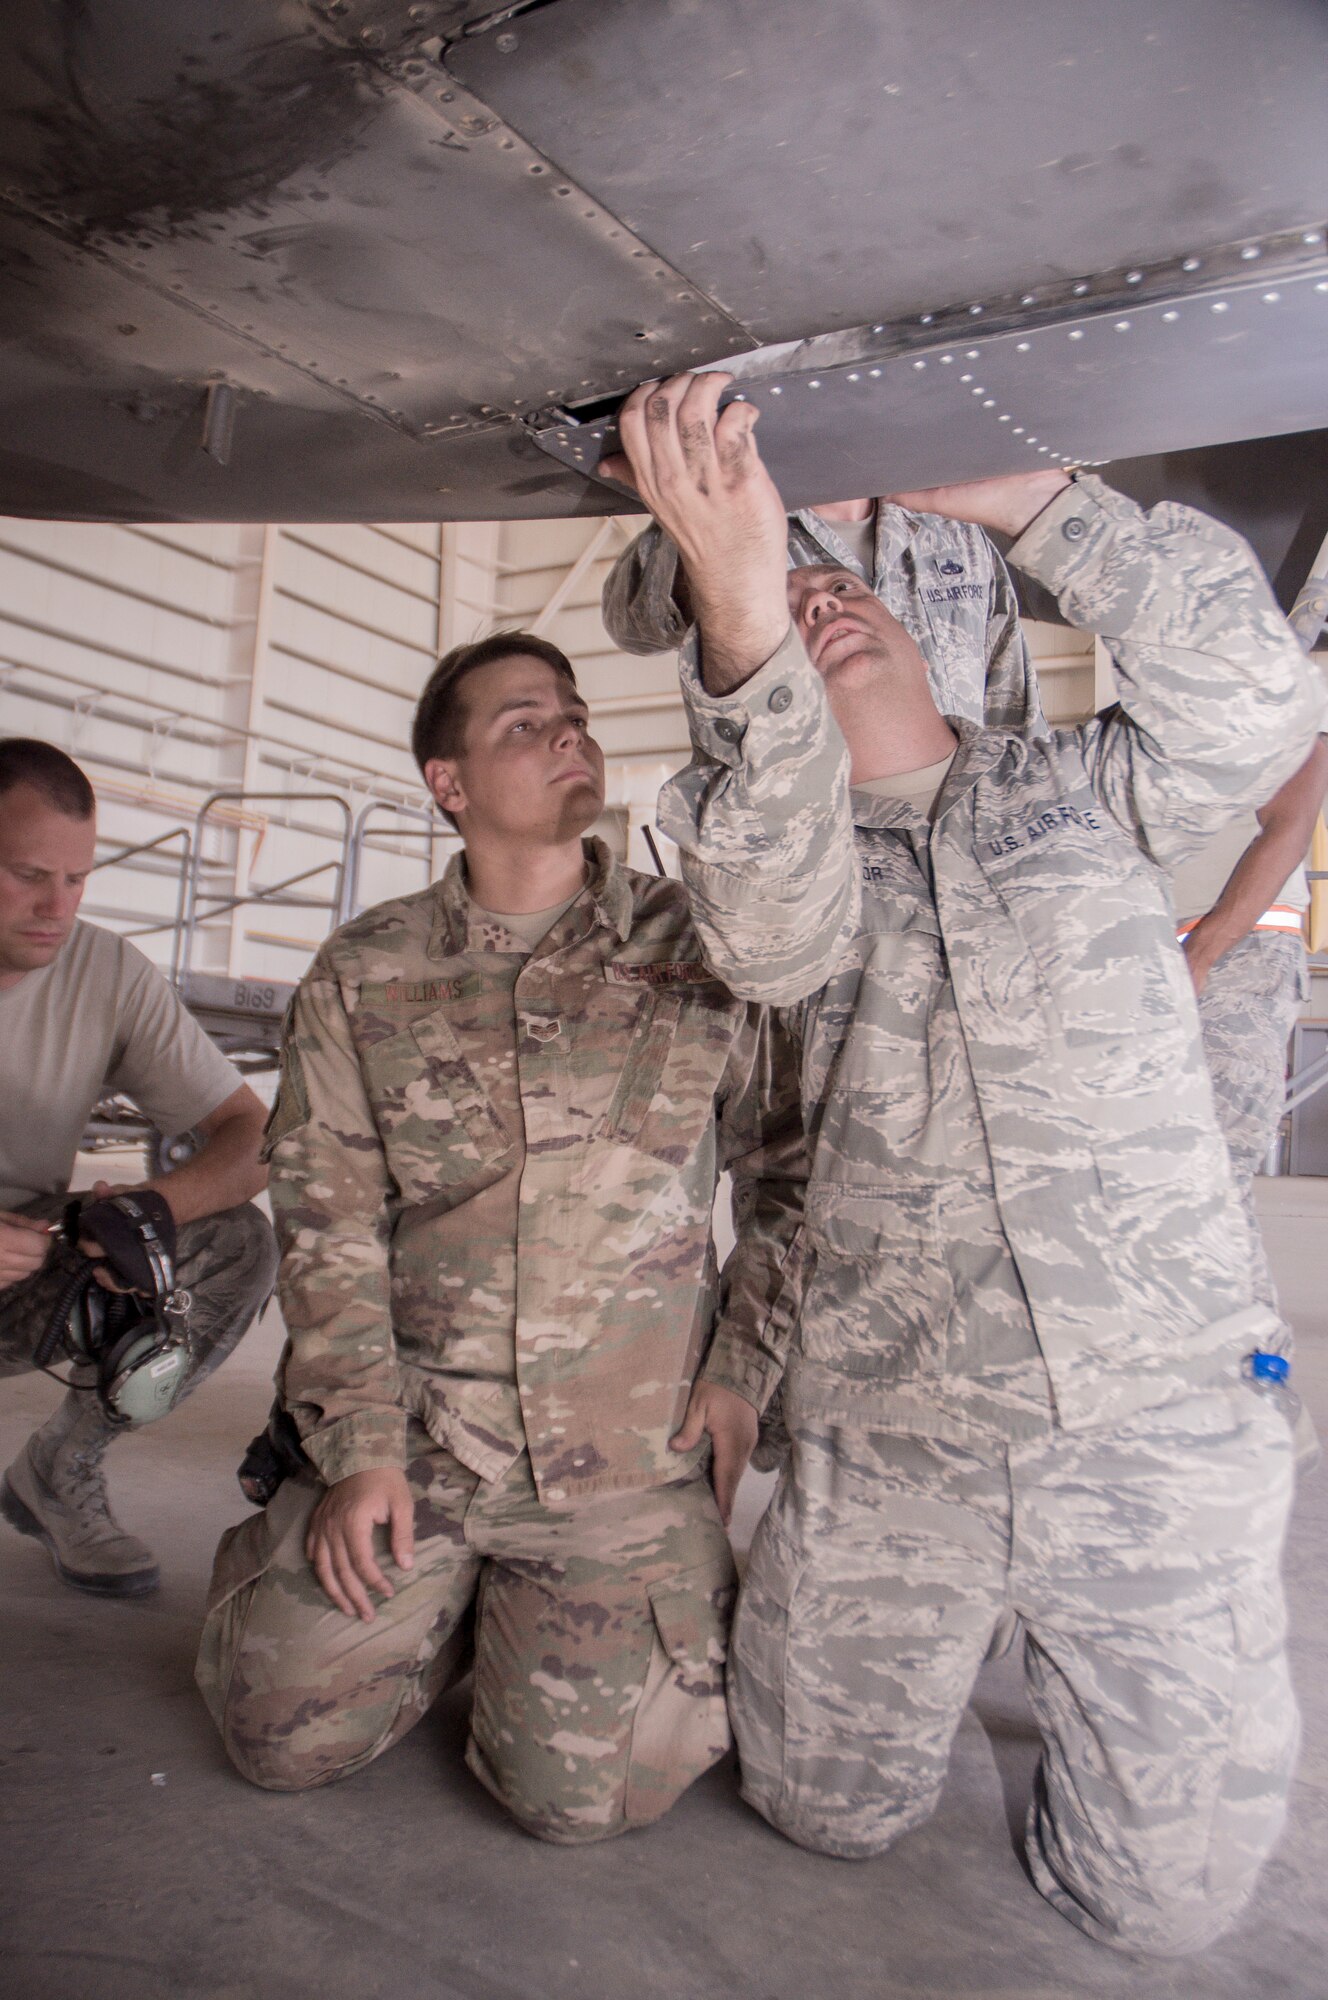 Master Sgt. Daniel Taylor, 386th Expeditionary Maintenance Squadron combat metals flight chief, checks a newly repaired C-130H landing gear door for fit after installation as Senior Airman Andrew Williams, a combat metals team member, looks on during an installation operation at an undisclosed location in Southwest Asia, June 23, 2017. (U.S. Air Force photo by Master Sgt. Eric M. Sharman)